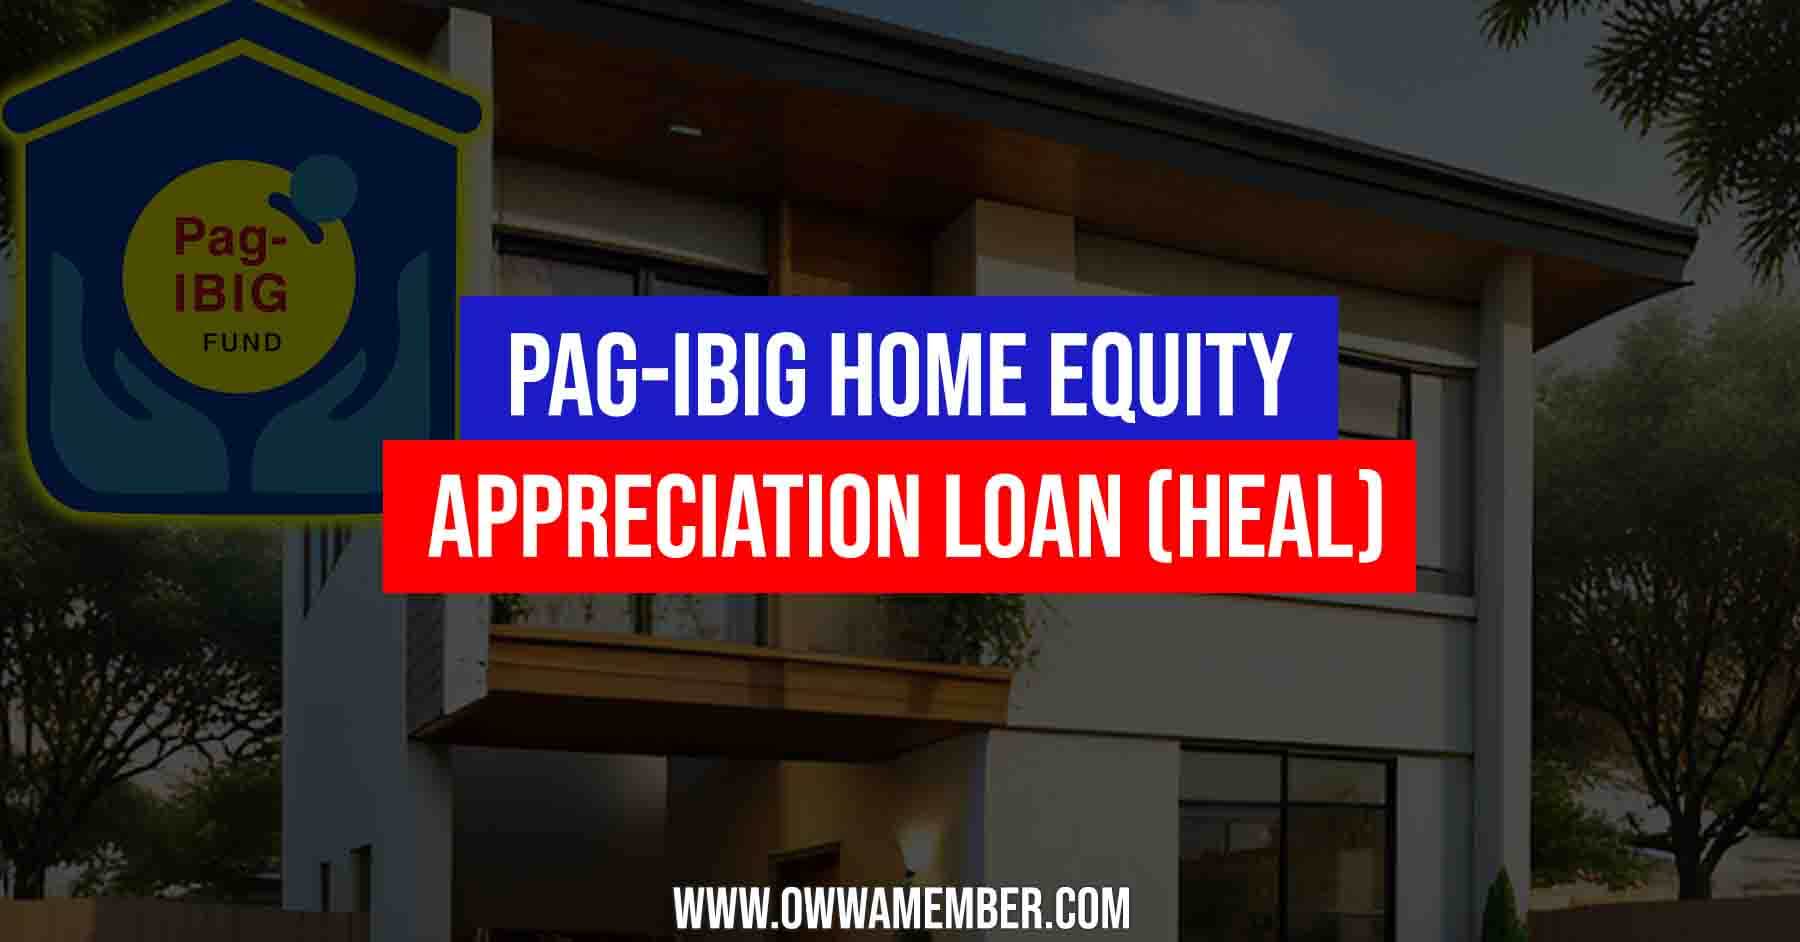 apply for Pag-IBIG Home Equity Appreciation Loan (HEAL)